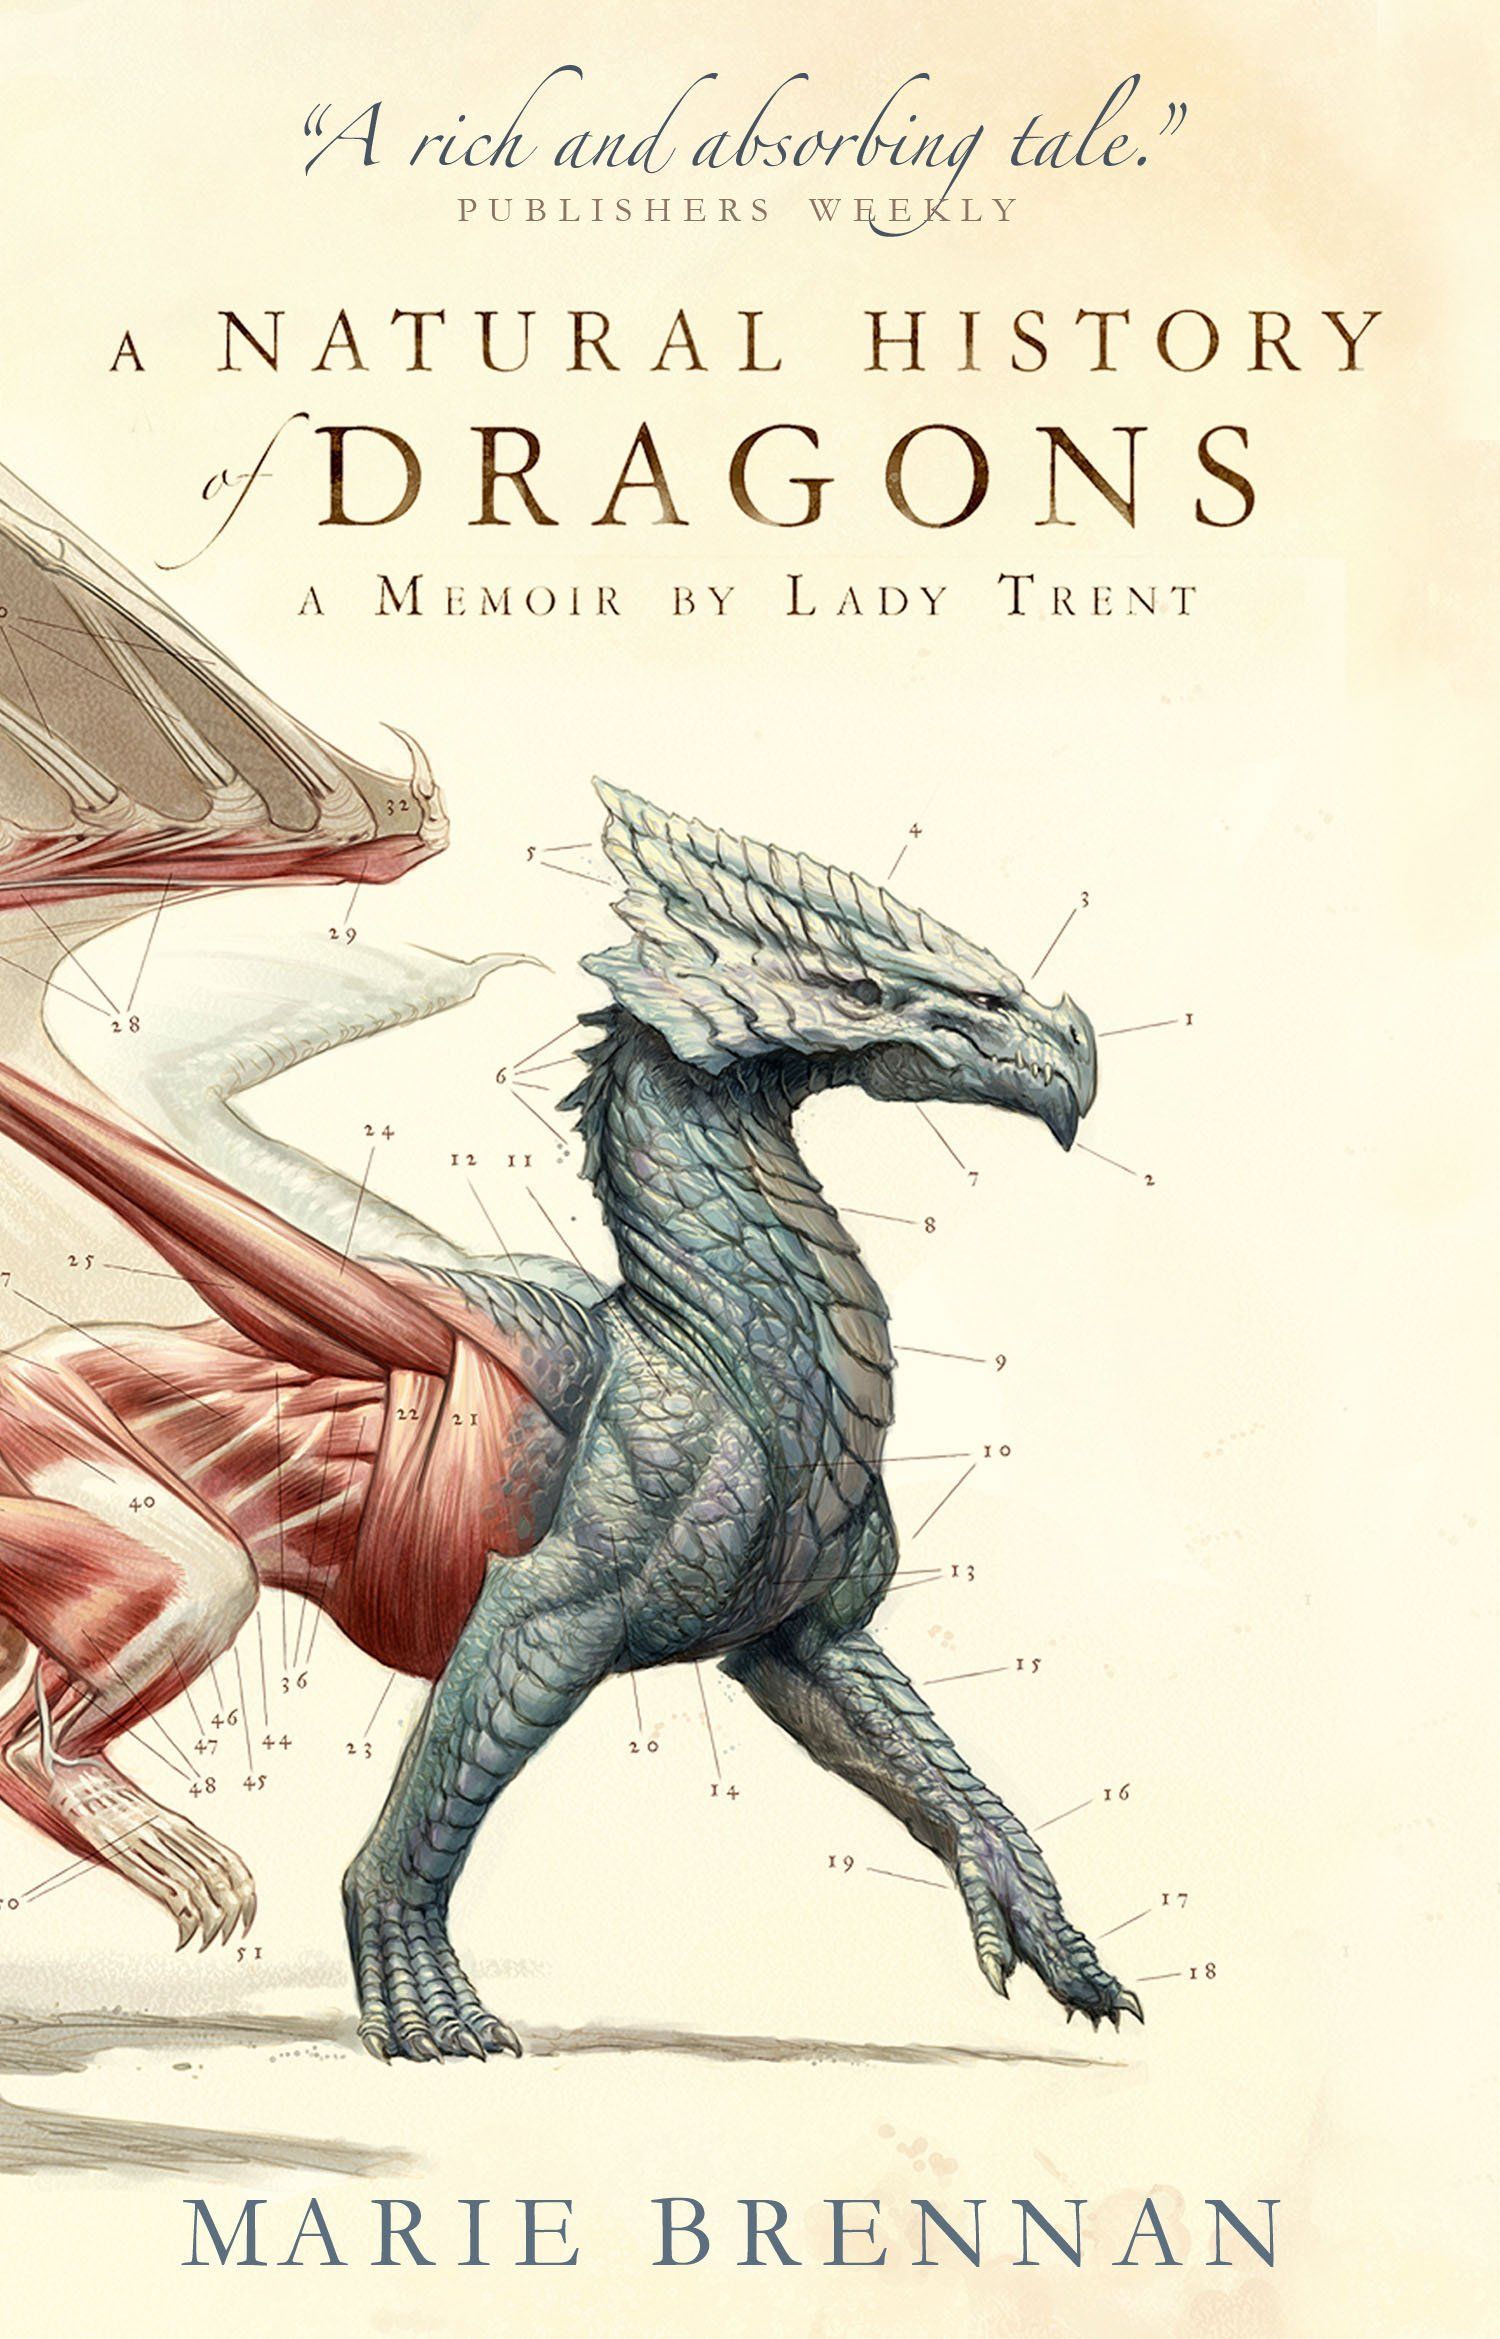 Top 10 dragons in fiction, Children's books